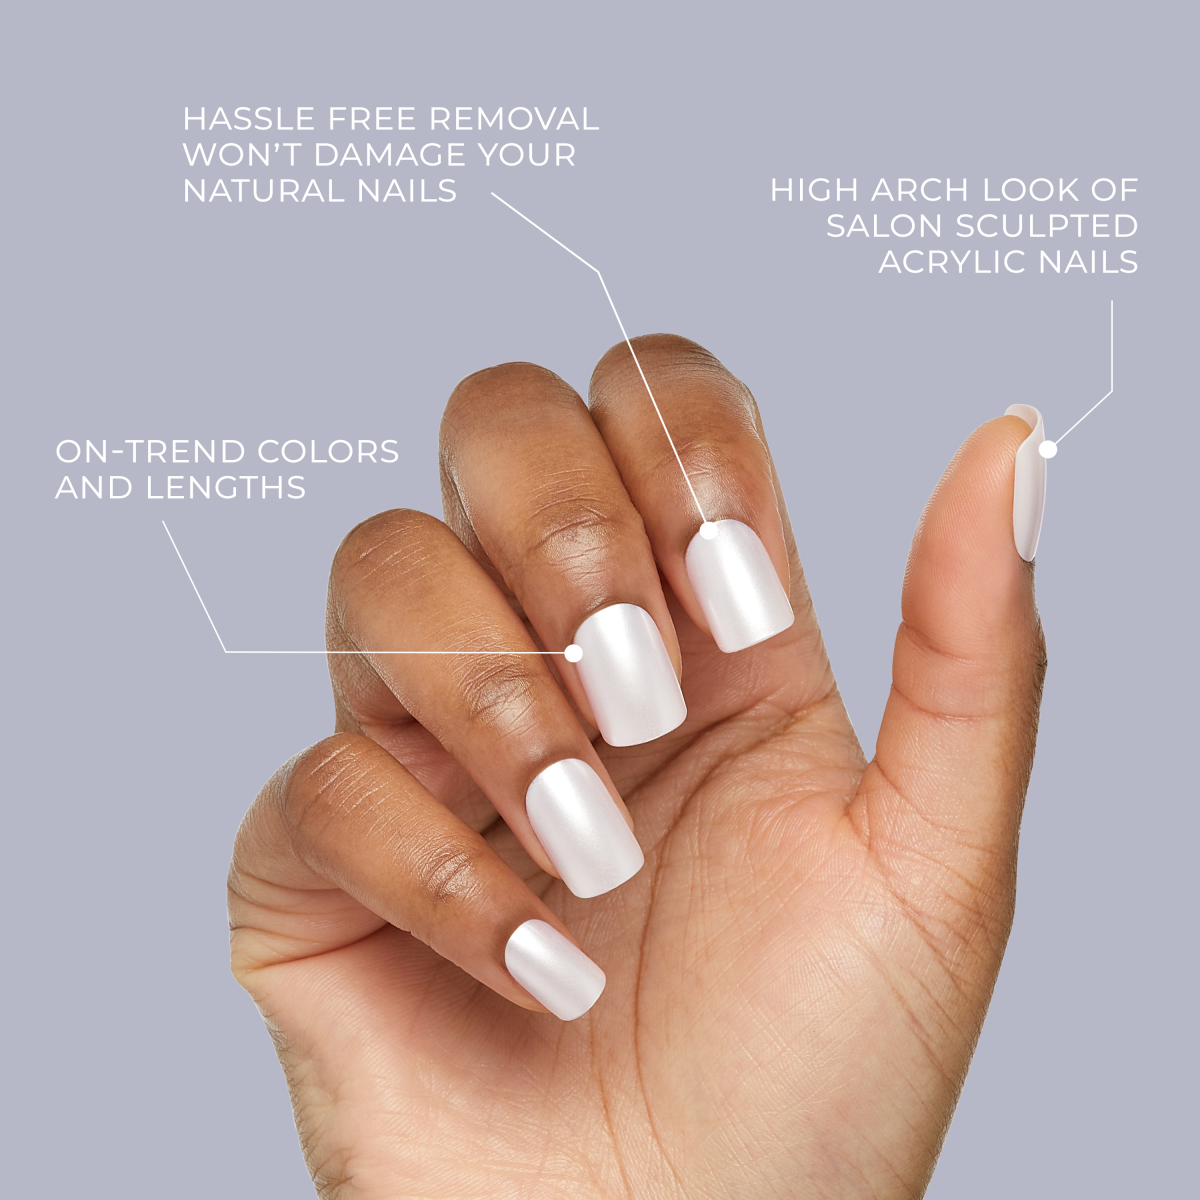 Gels vs acrylics – which one wins?